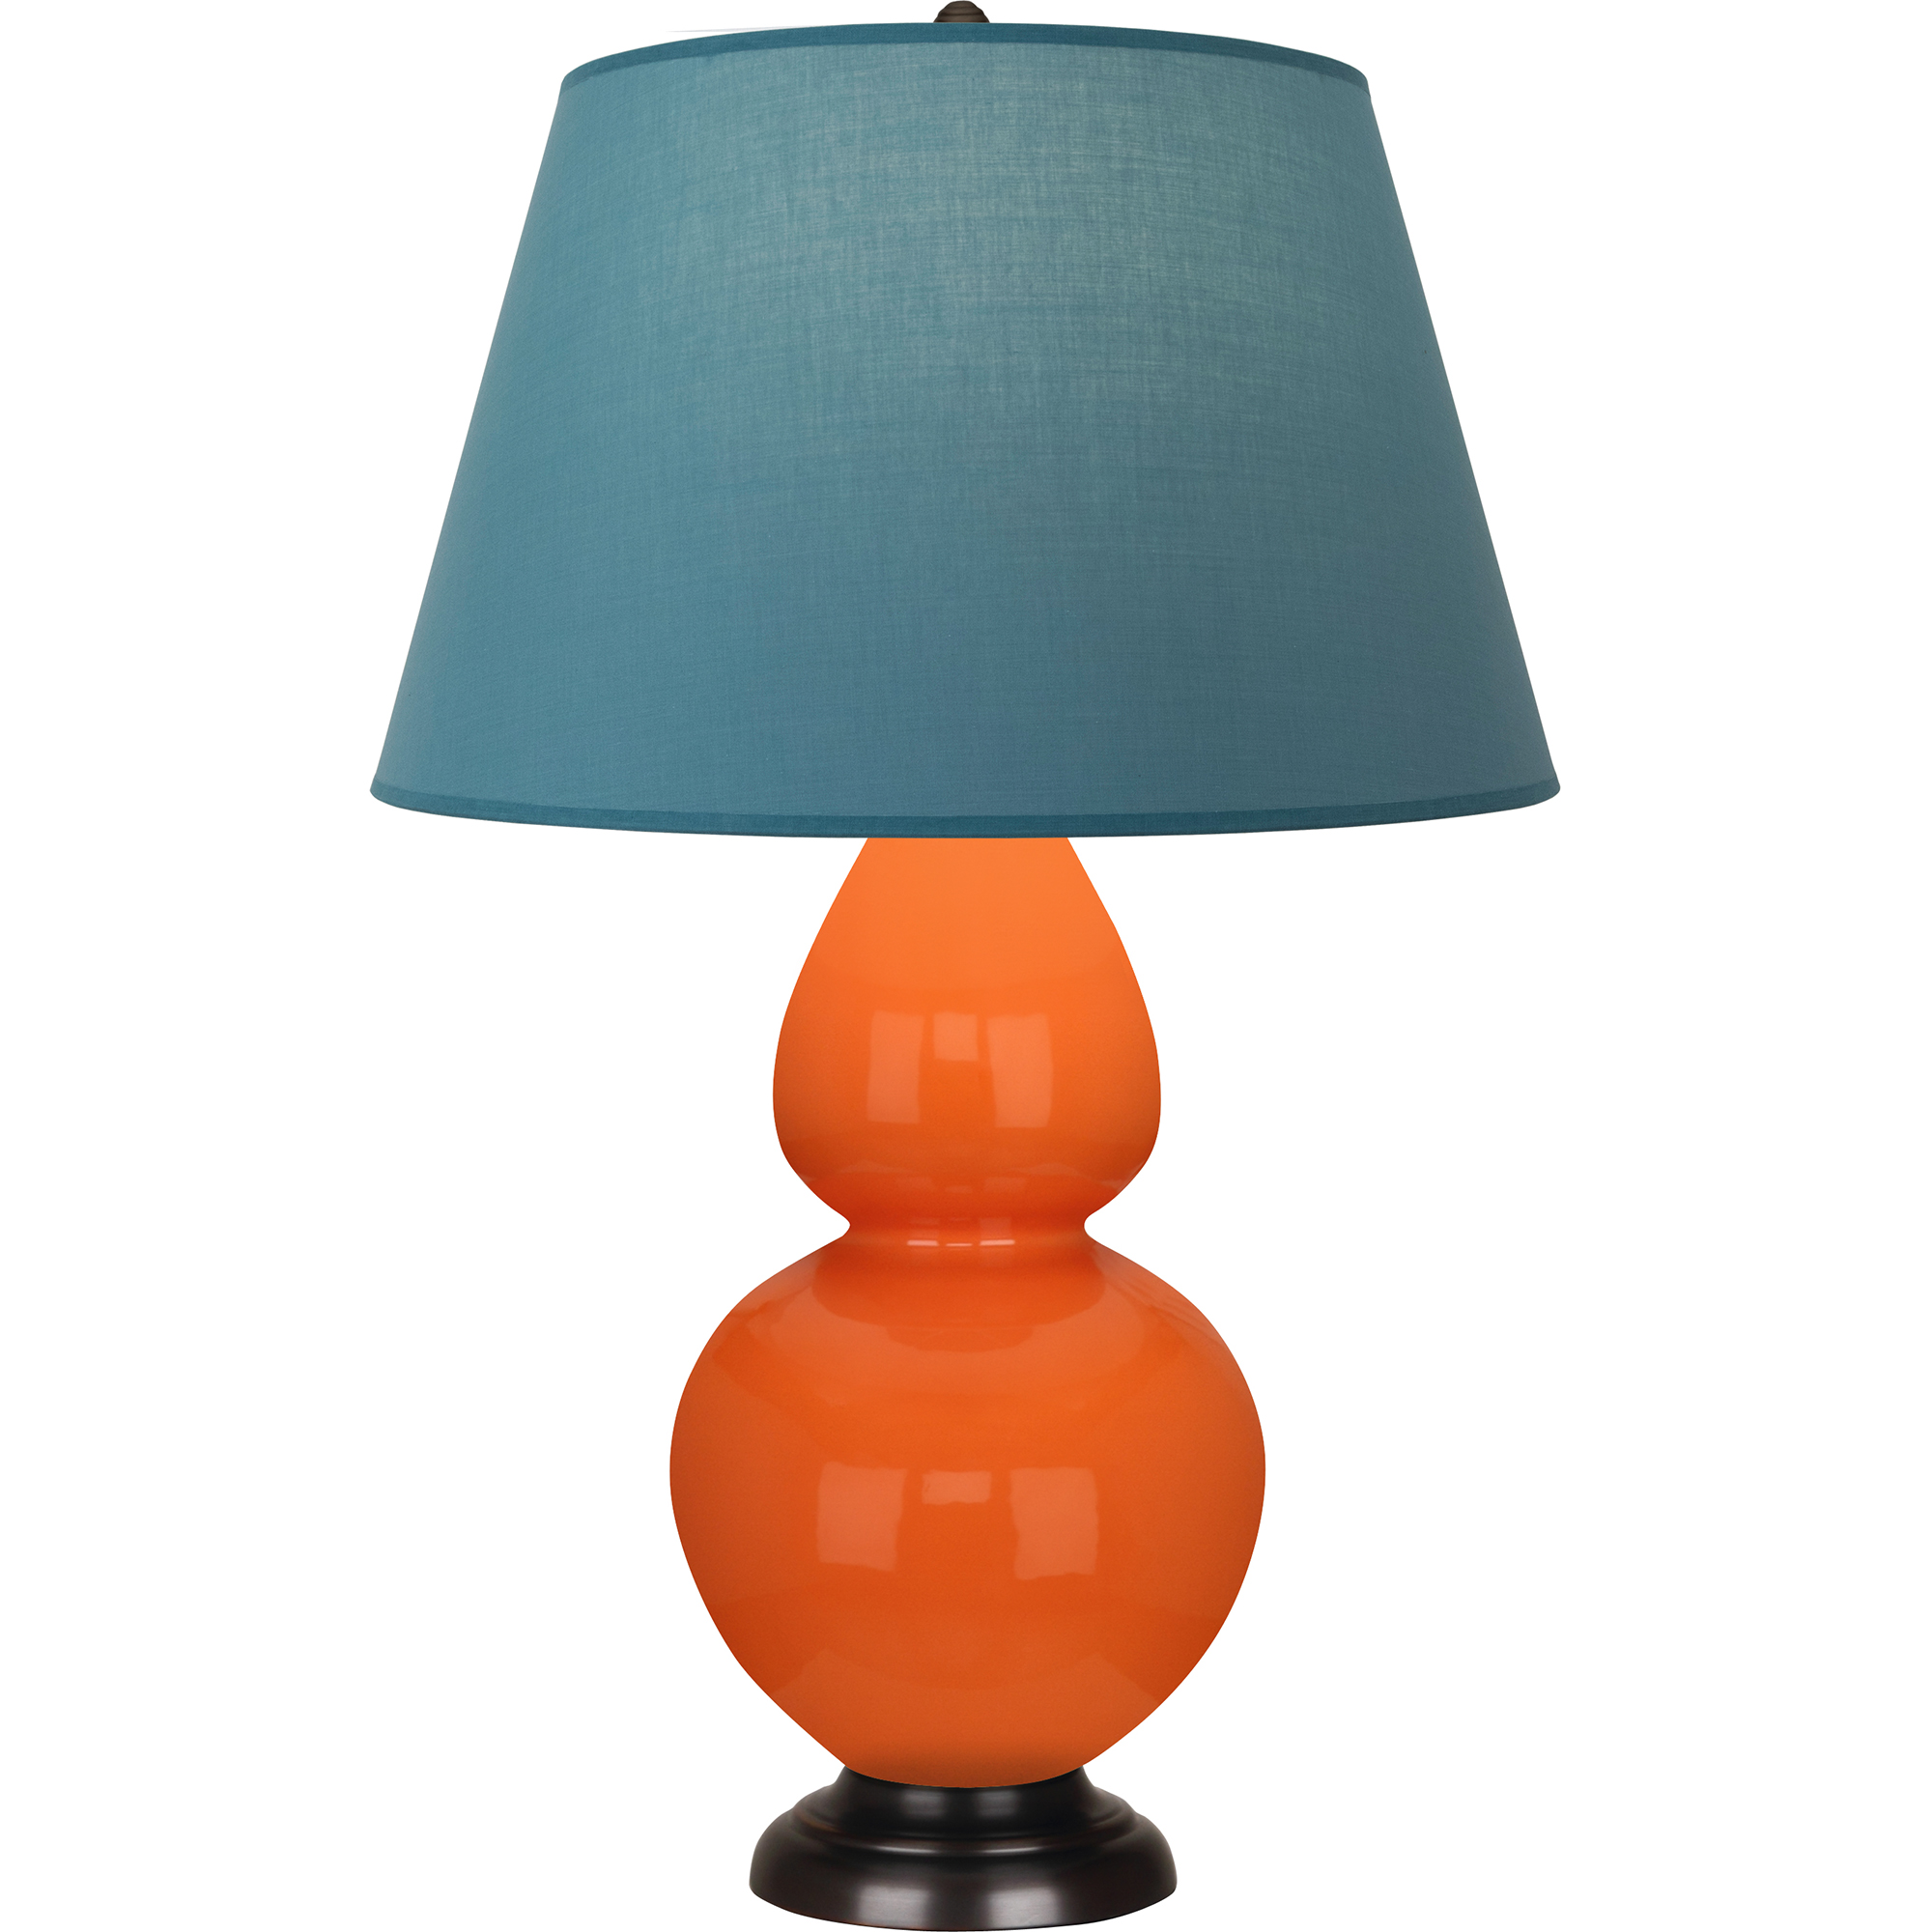 Double Gourd Table Lamp Style #1645B